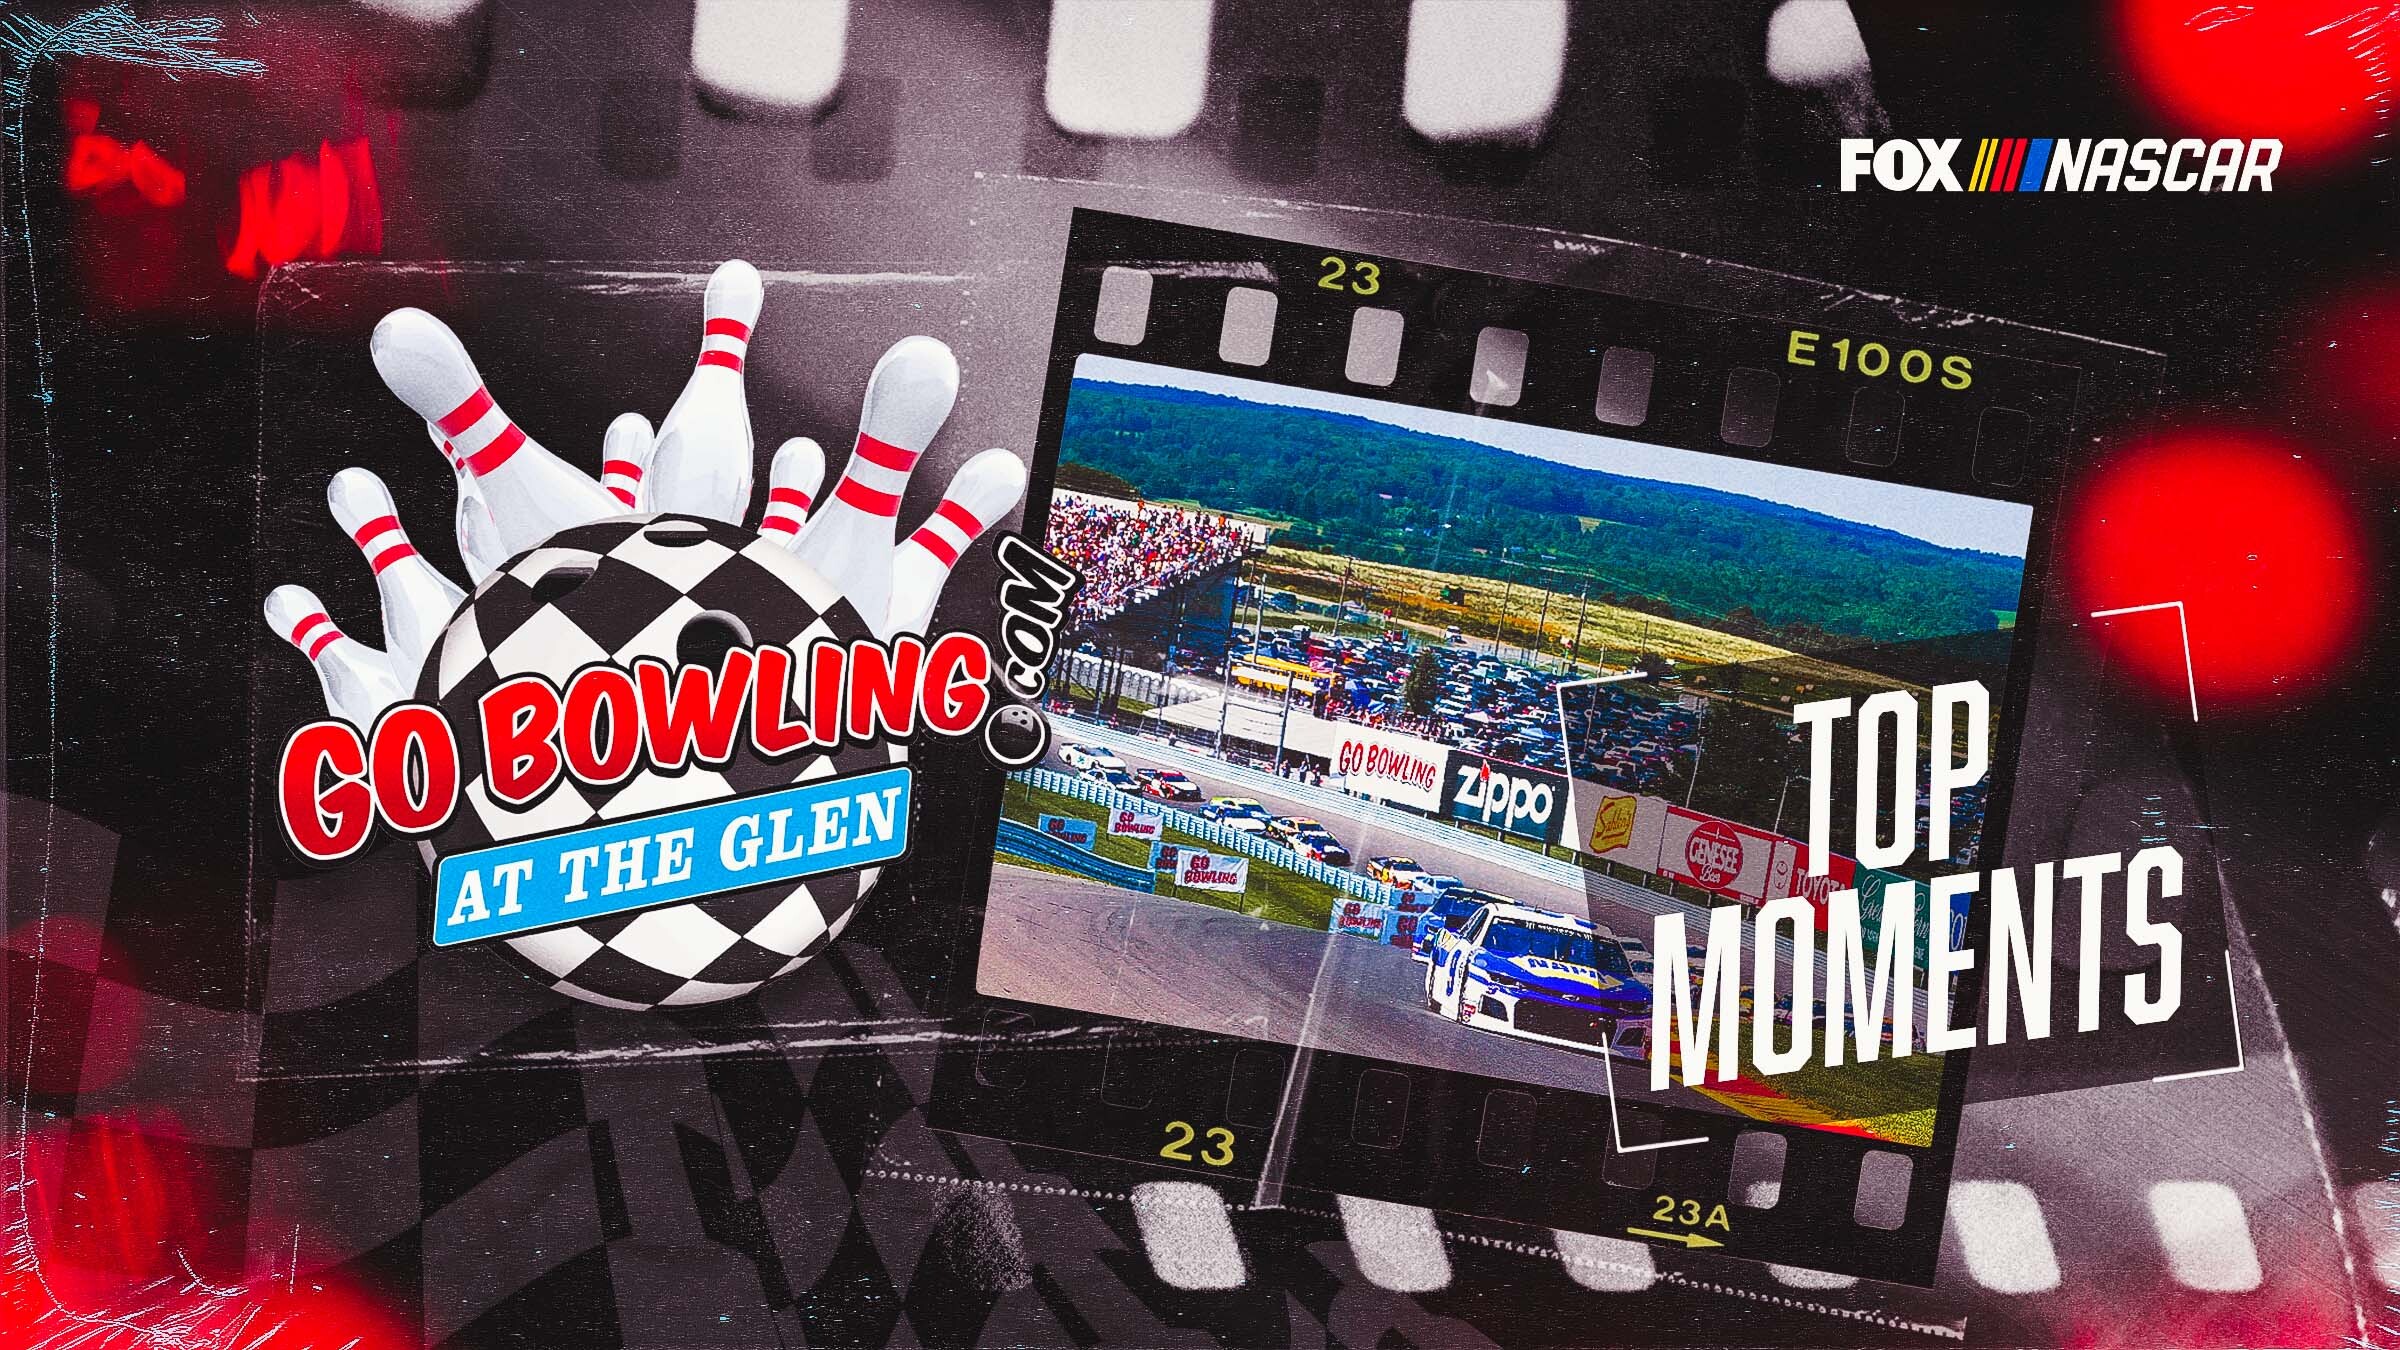 Go Bowling at The Glen live updates: Top moments from Watkins Glen Int'l